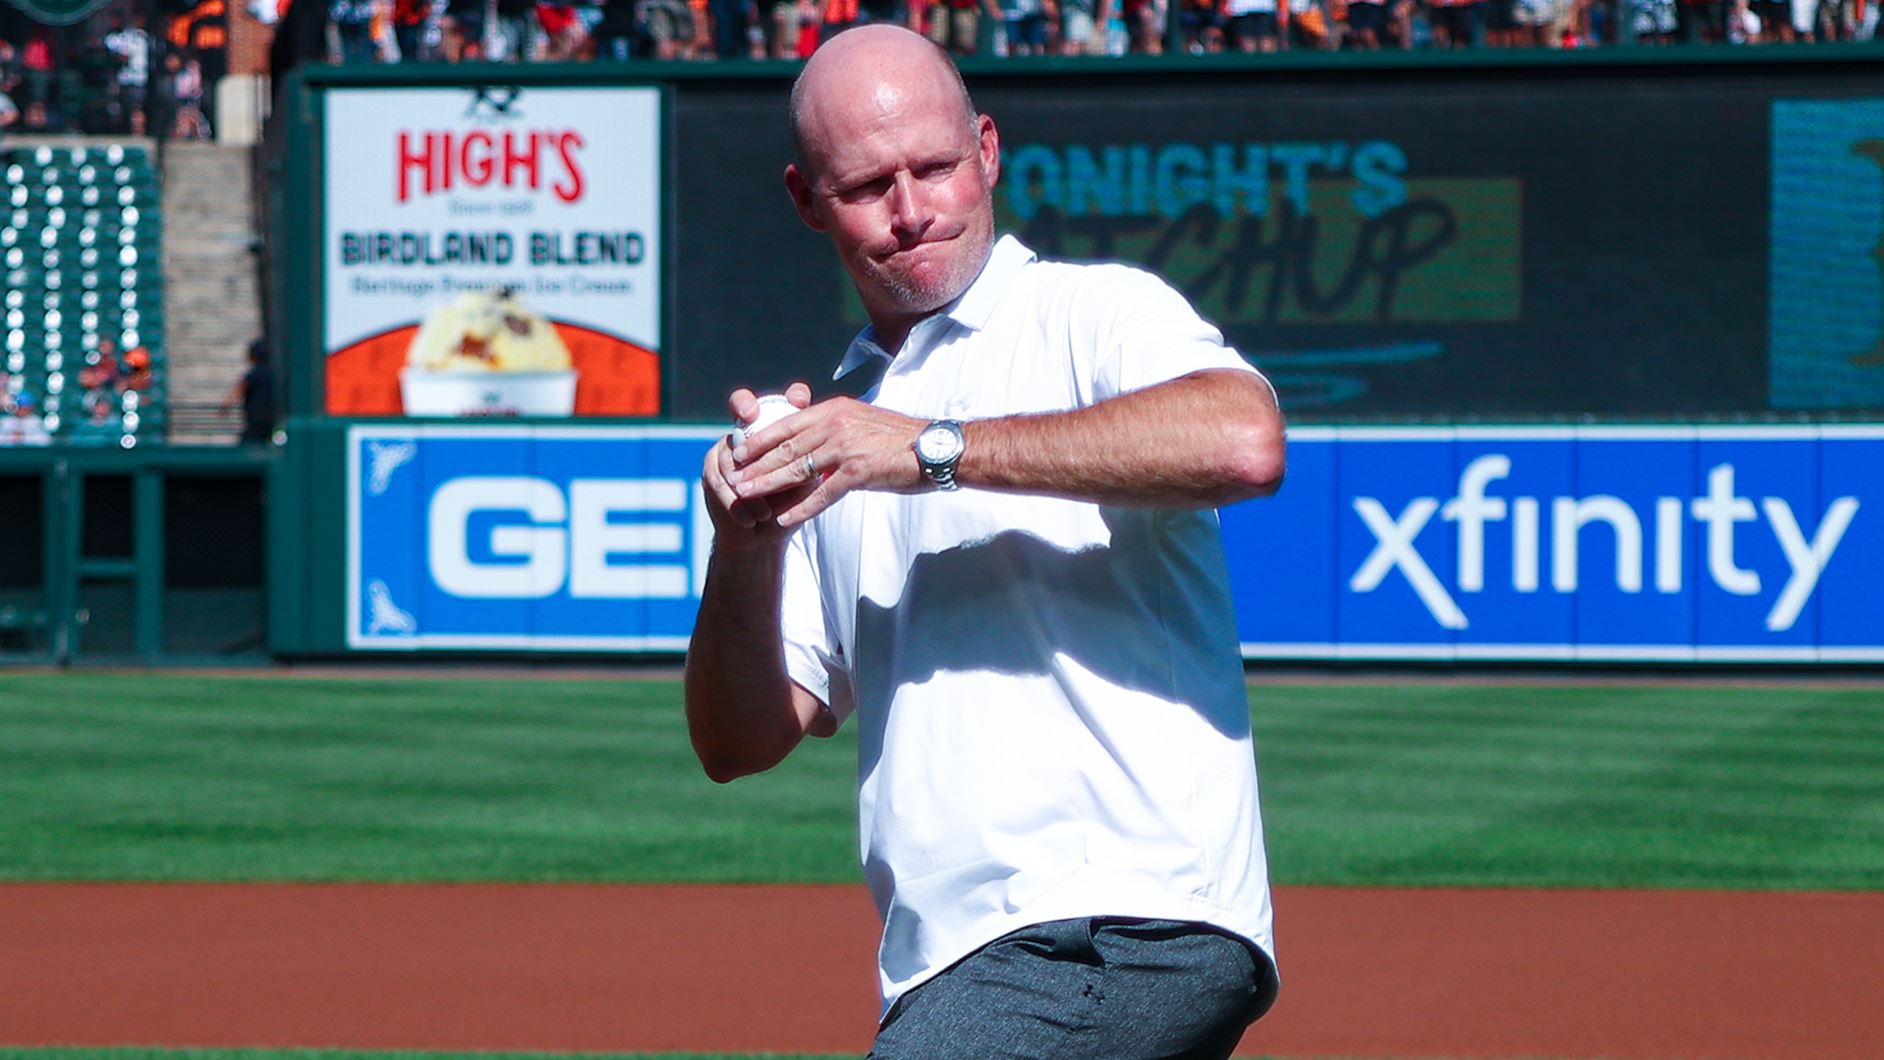 New Terps Hoop Coach Willard Throws First Pitch Strike At Orioles Game